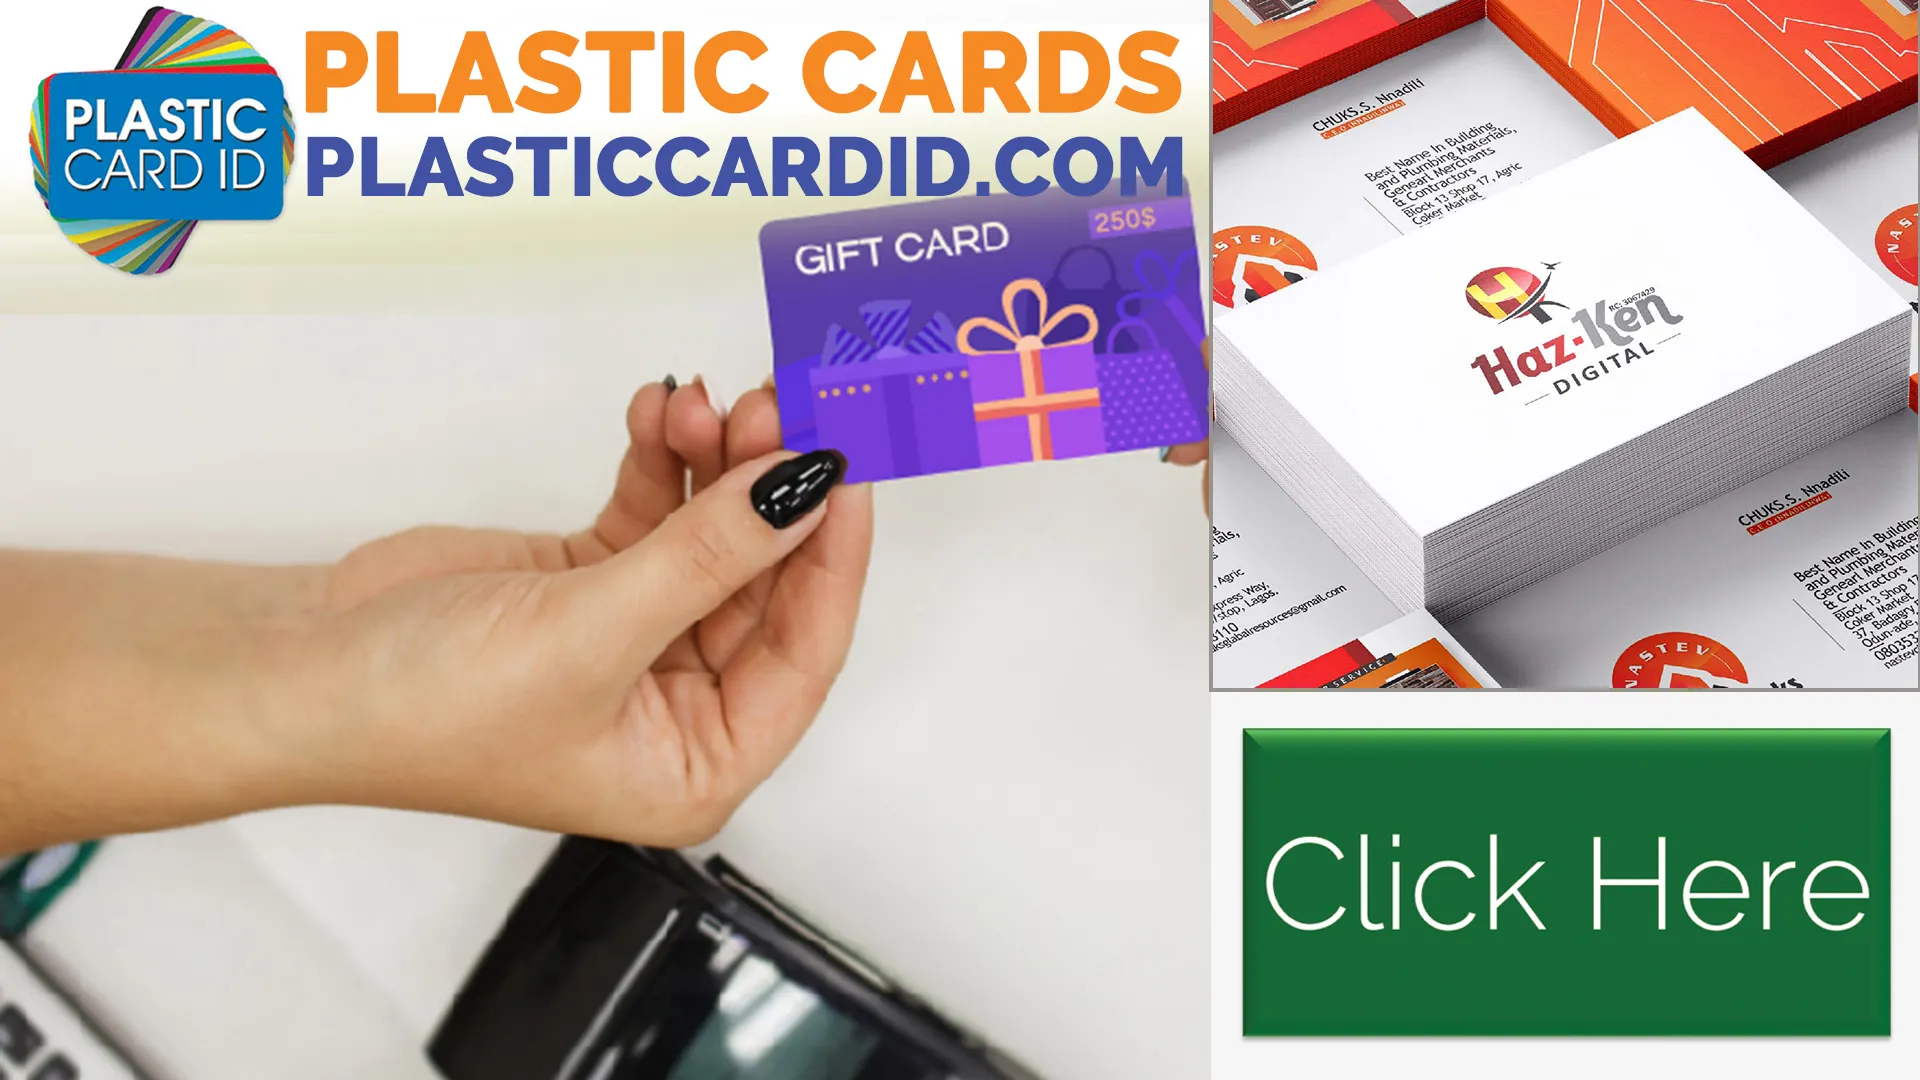 Design and Customization to Set Your Cards Apart